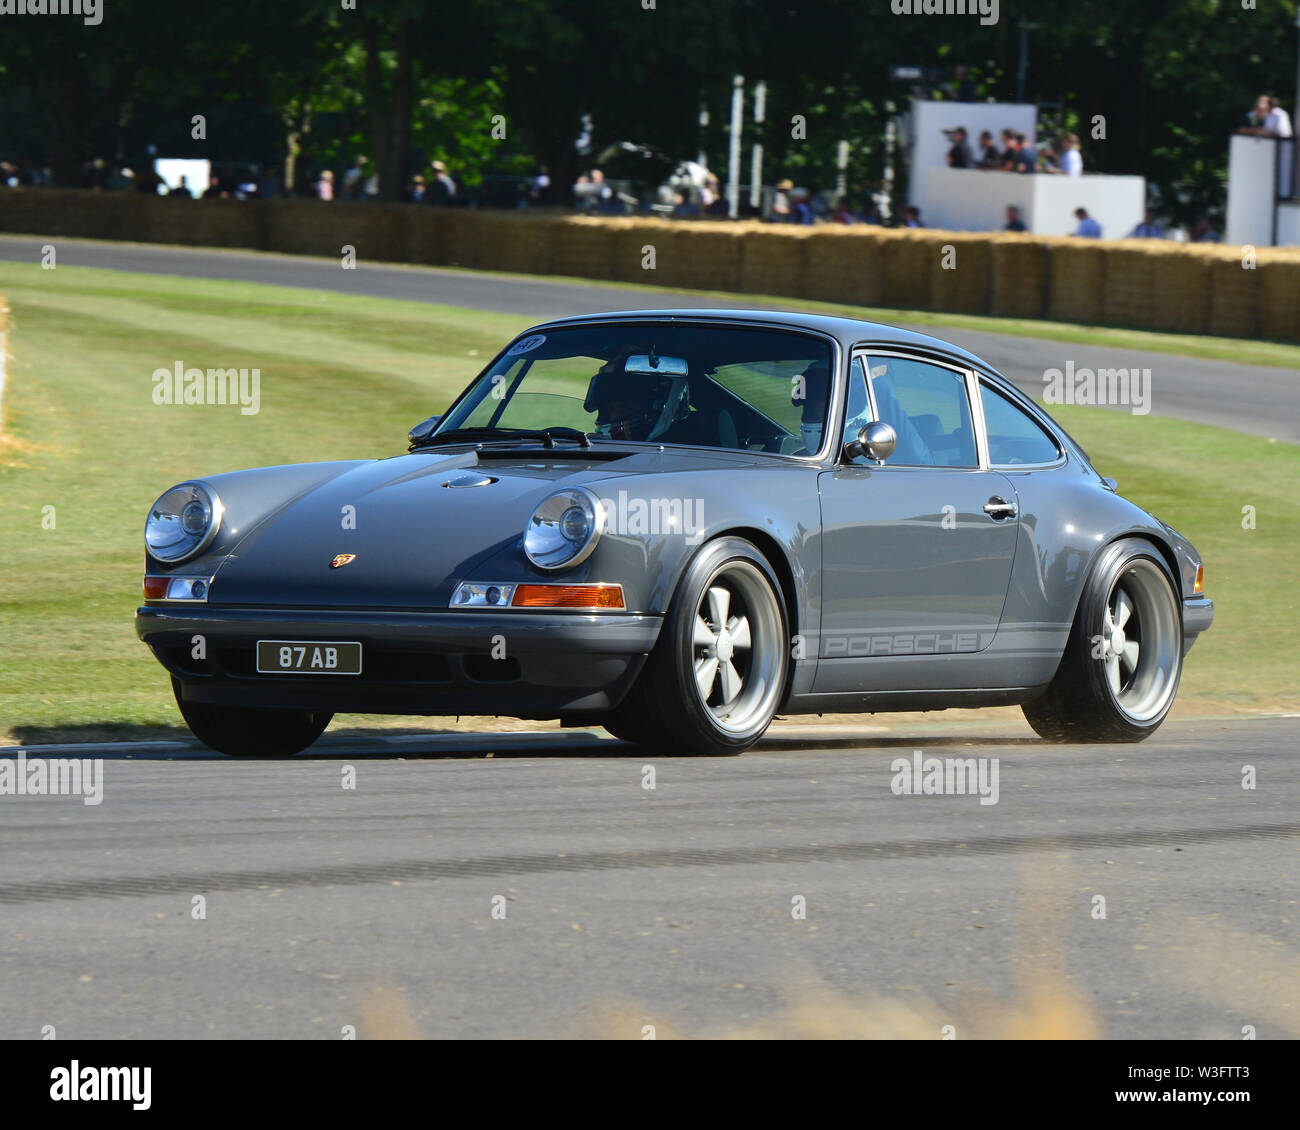 Porsche 911 reimagined by Singer DLS, Goodwood Festival of Speed, 2019,  Festival of Speed, Speed Kings, Motorsport's Record Breakers, July 2019,  Moto Stock Photo - Alamy